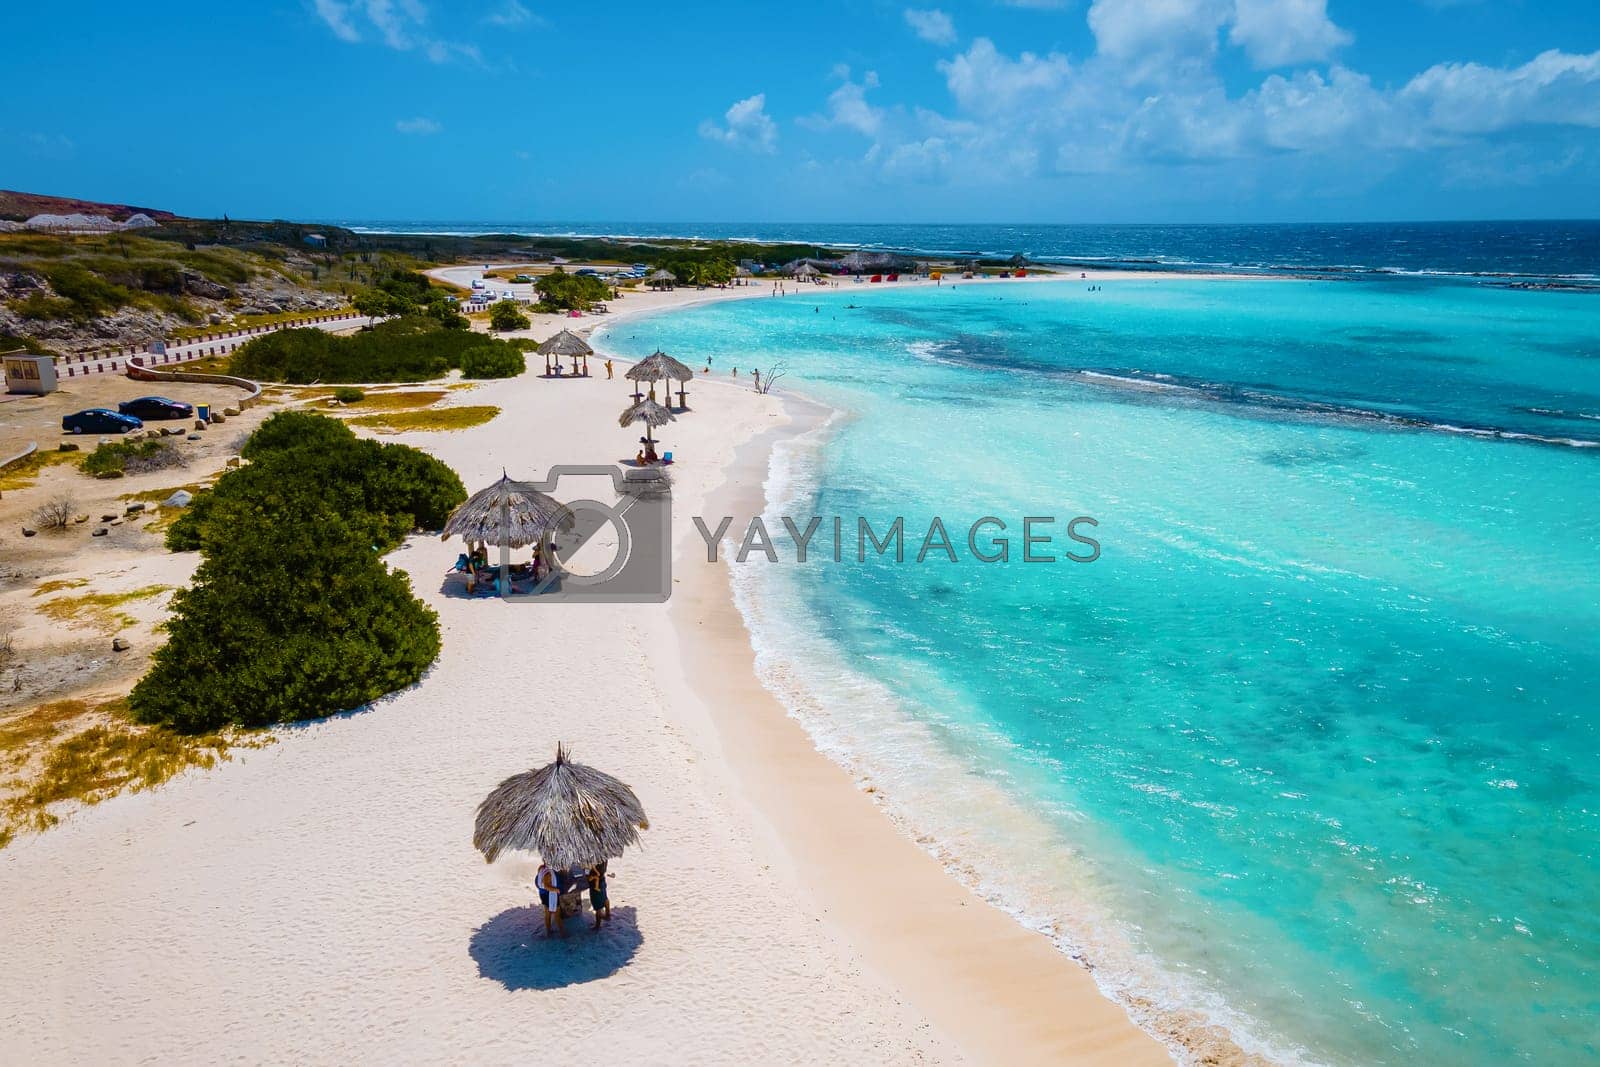 Royalty free image of Amazing Baby Beach and coast on Aruba, Caribbean, white beach with blue ocean tropical beach by fokkebok